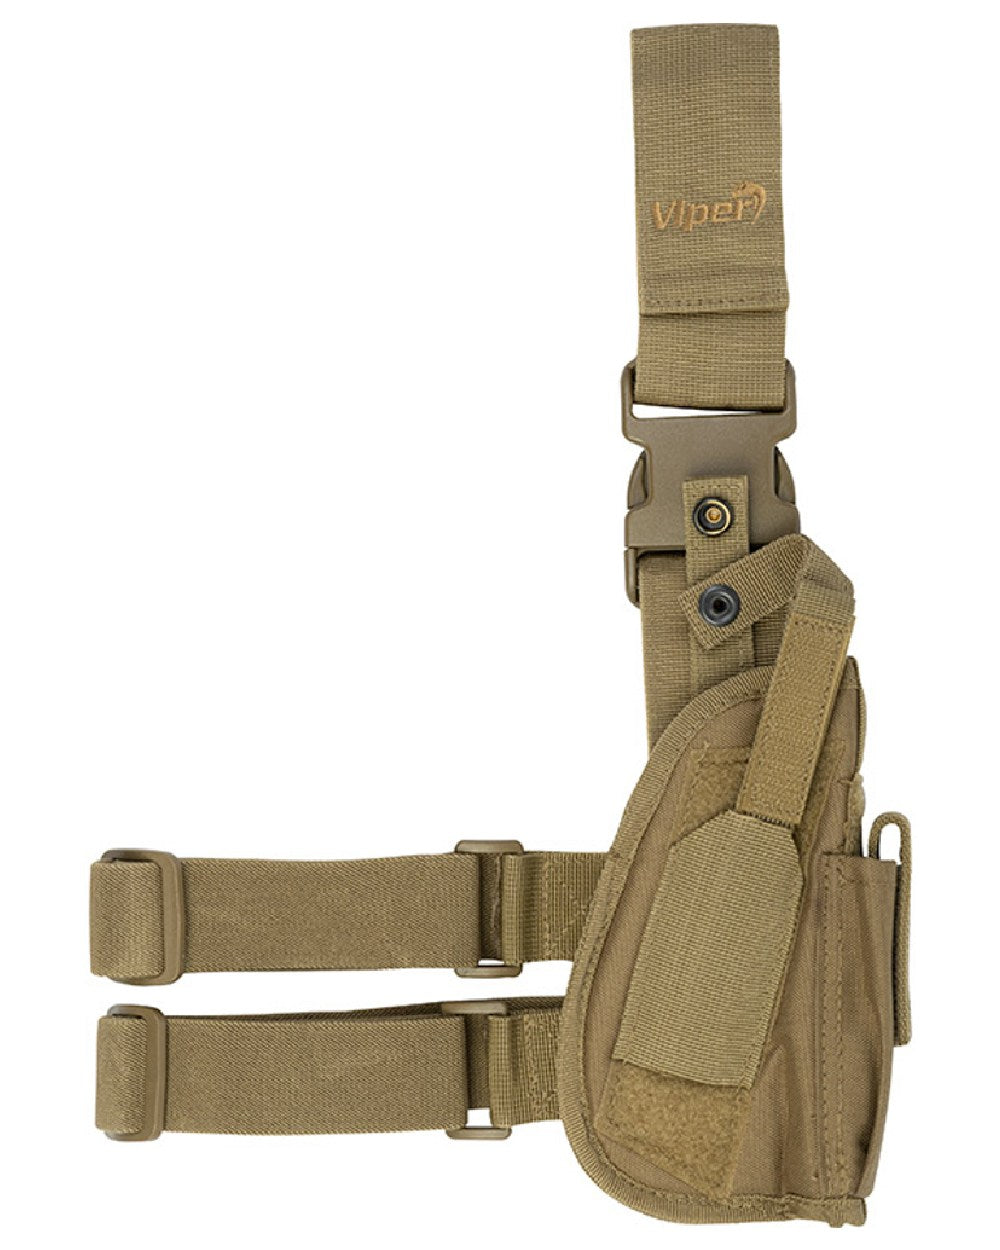 Viper Tactical Leg Holster in Coyote 